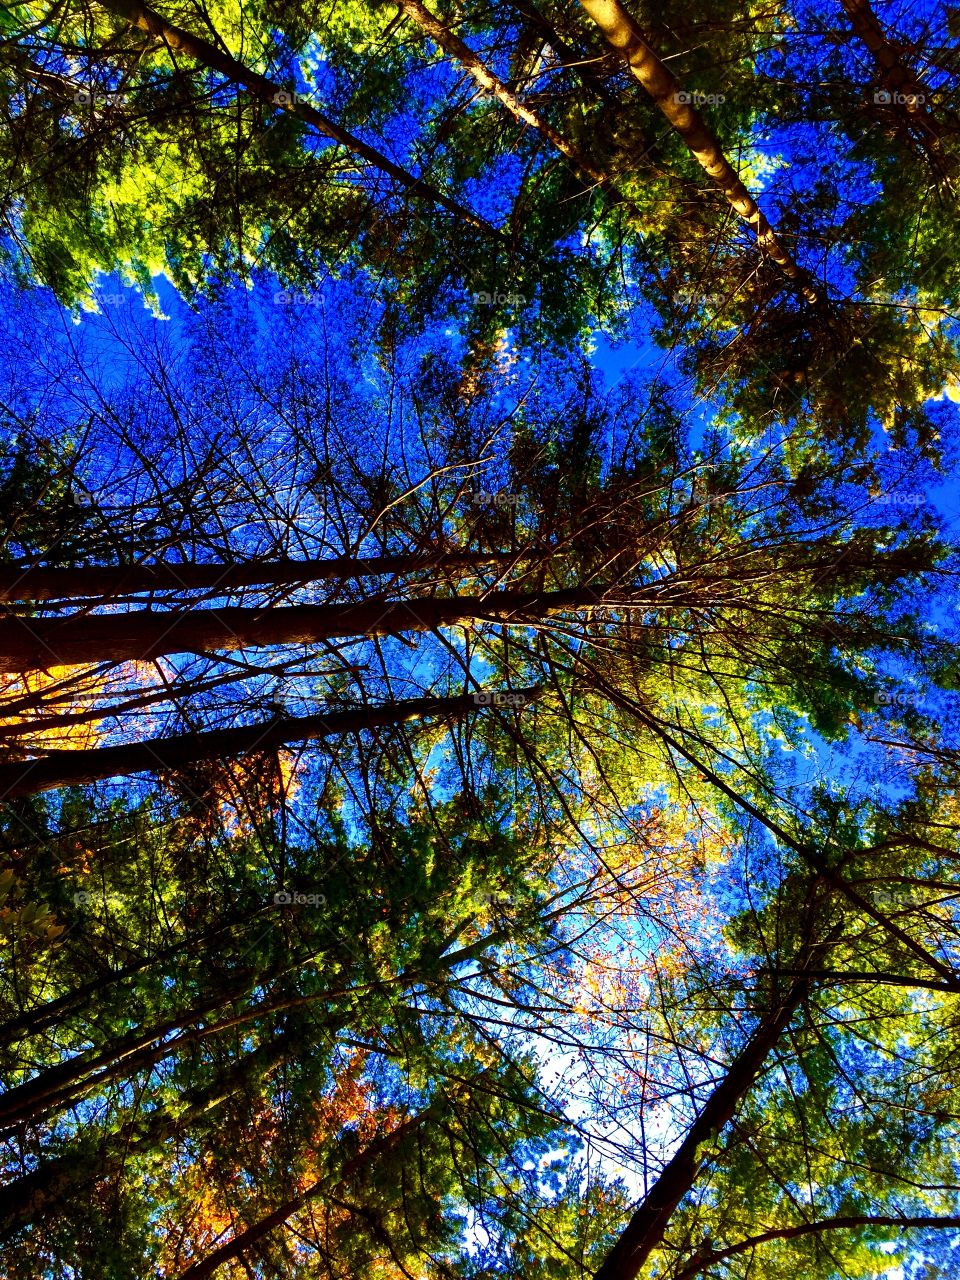 Look up at the trees. 